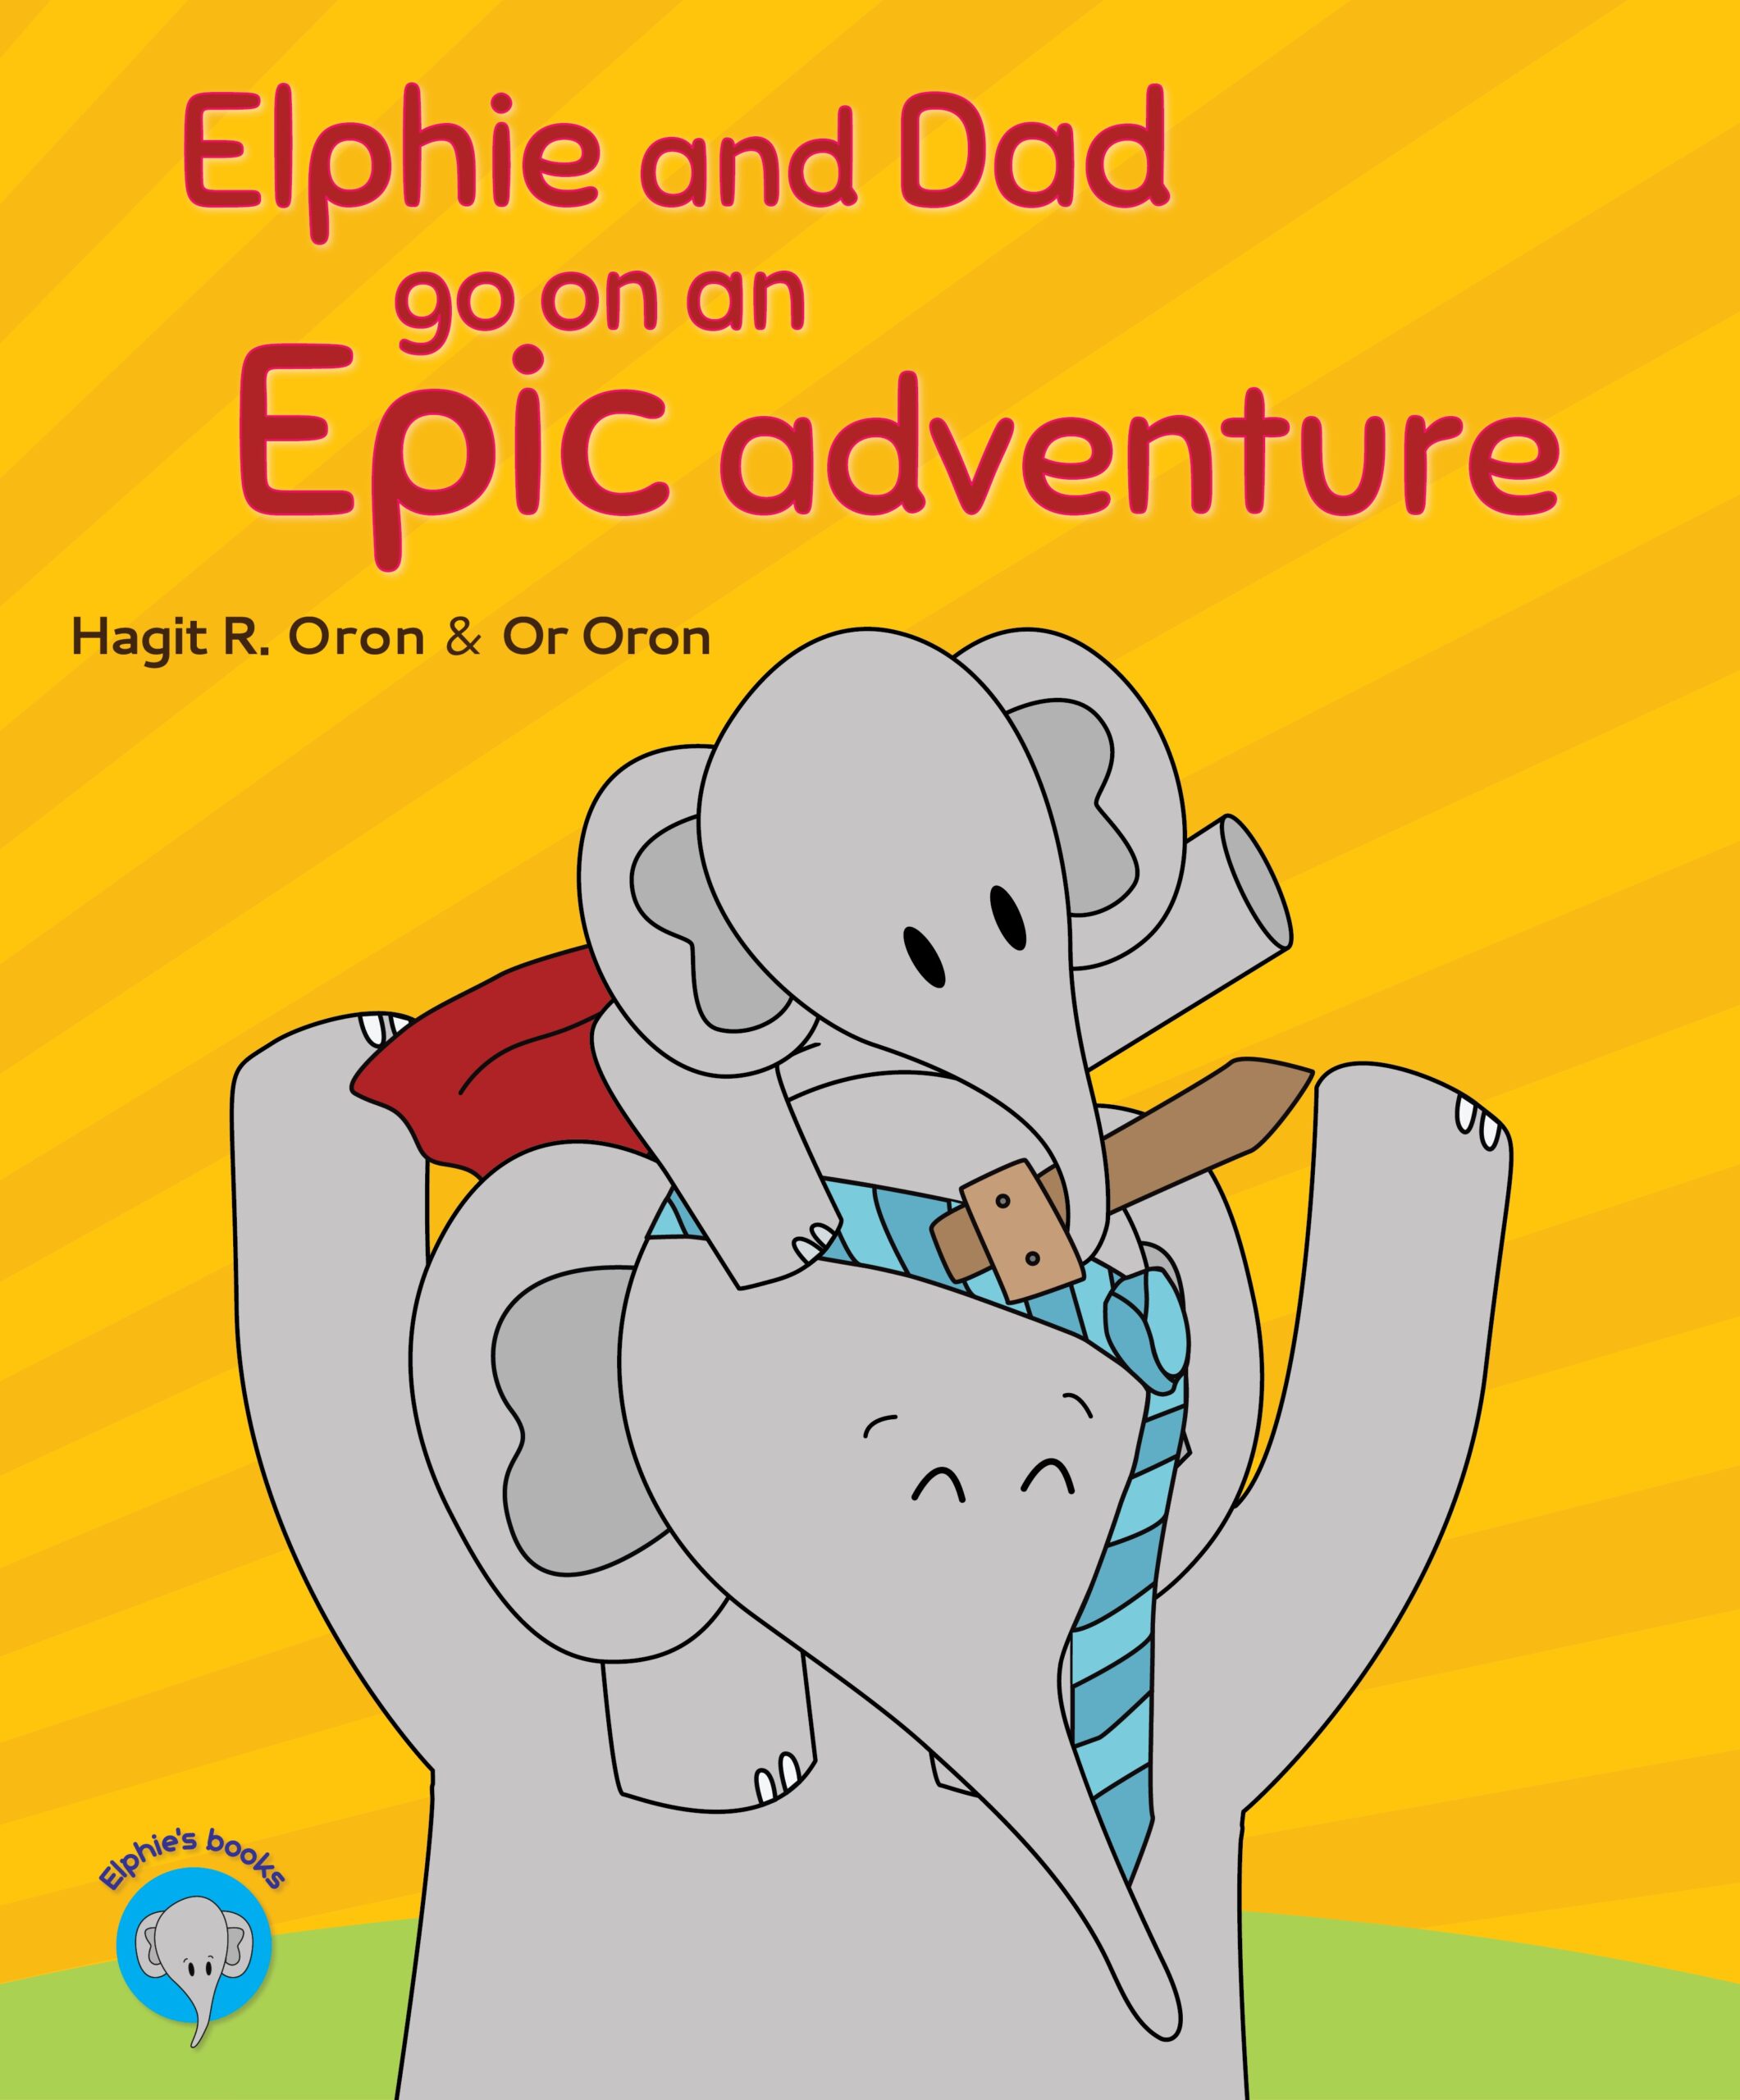 FREE: Elphie And Dad Go On an Epic Adventure by Hagit R. Oron